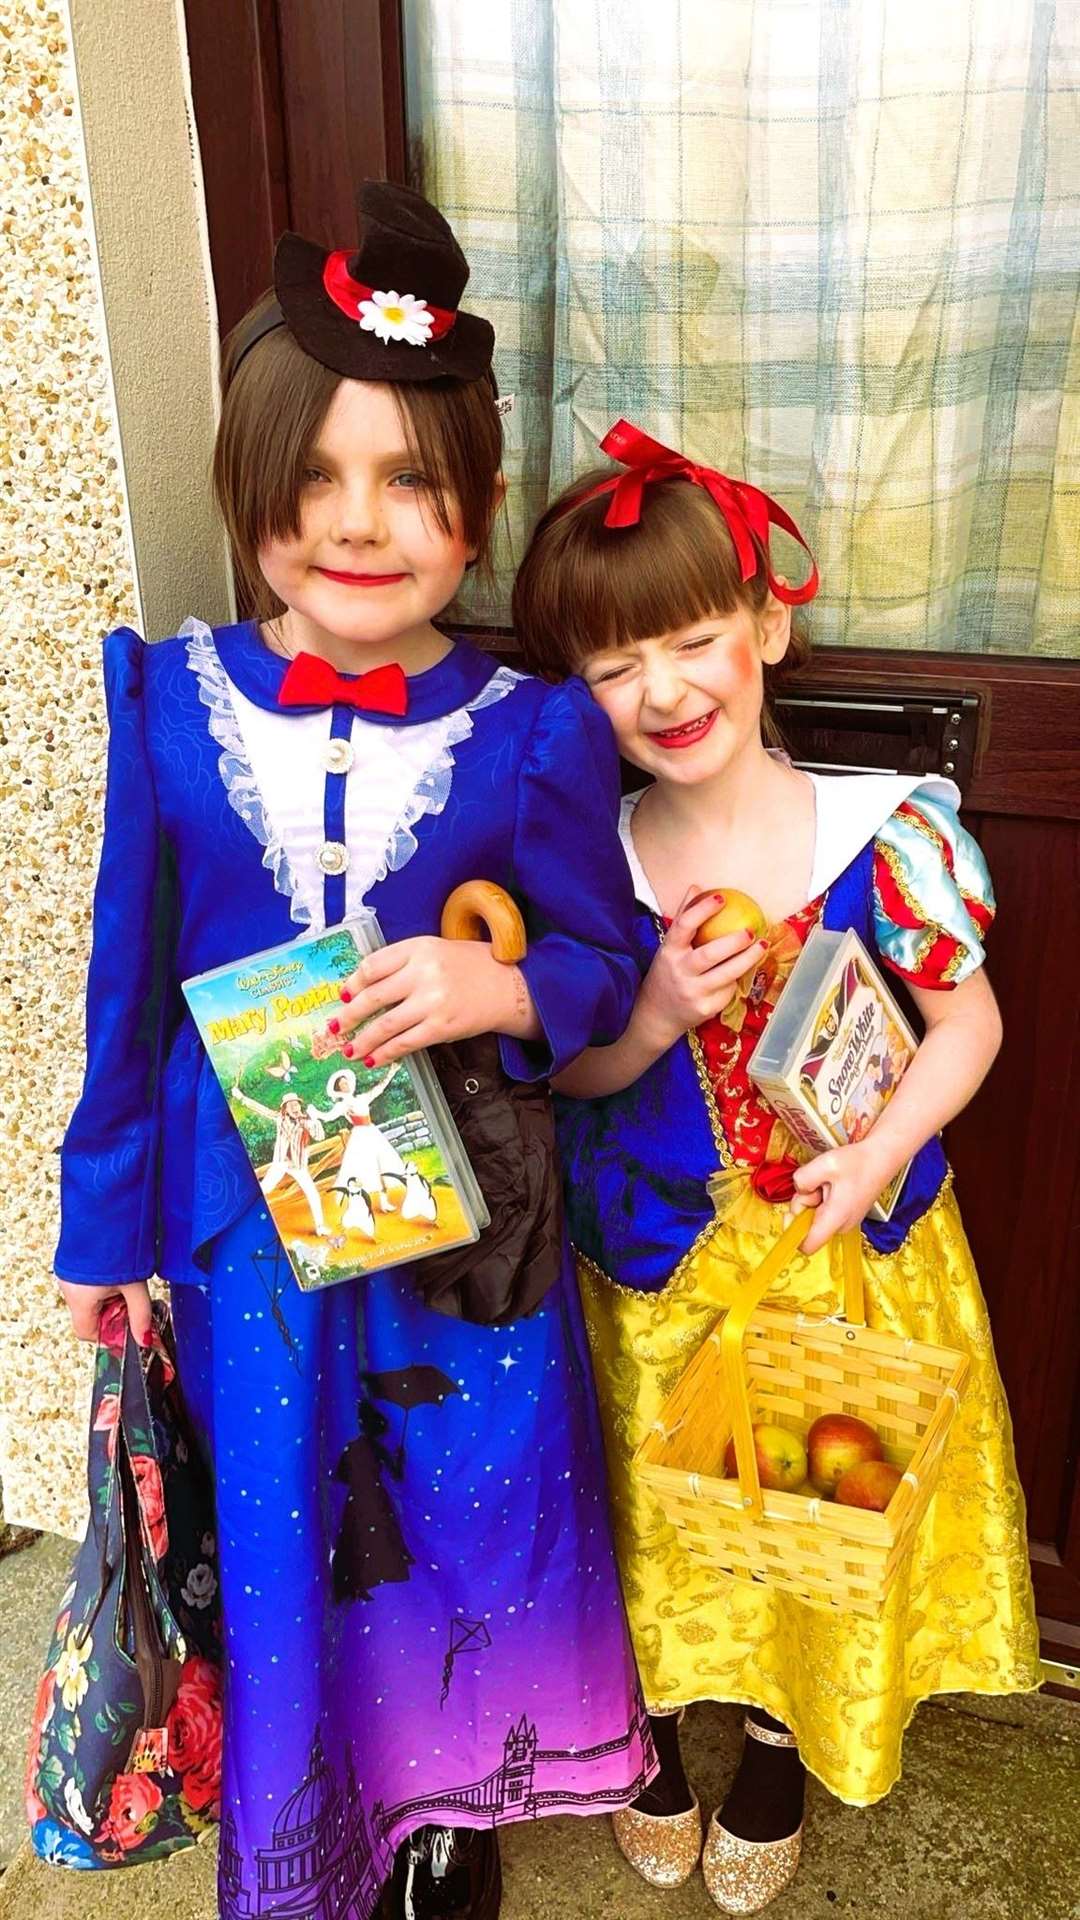 Yolanda Robertson's picture of Hollie (7) as Mary Poppins and Cardi (5) as Snow White.